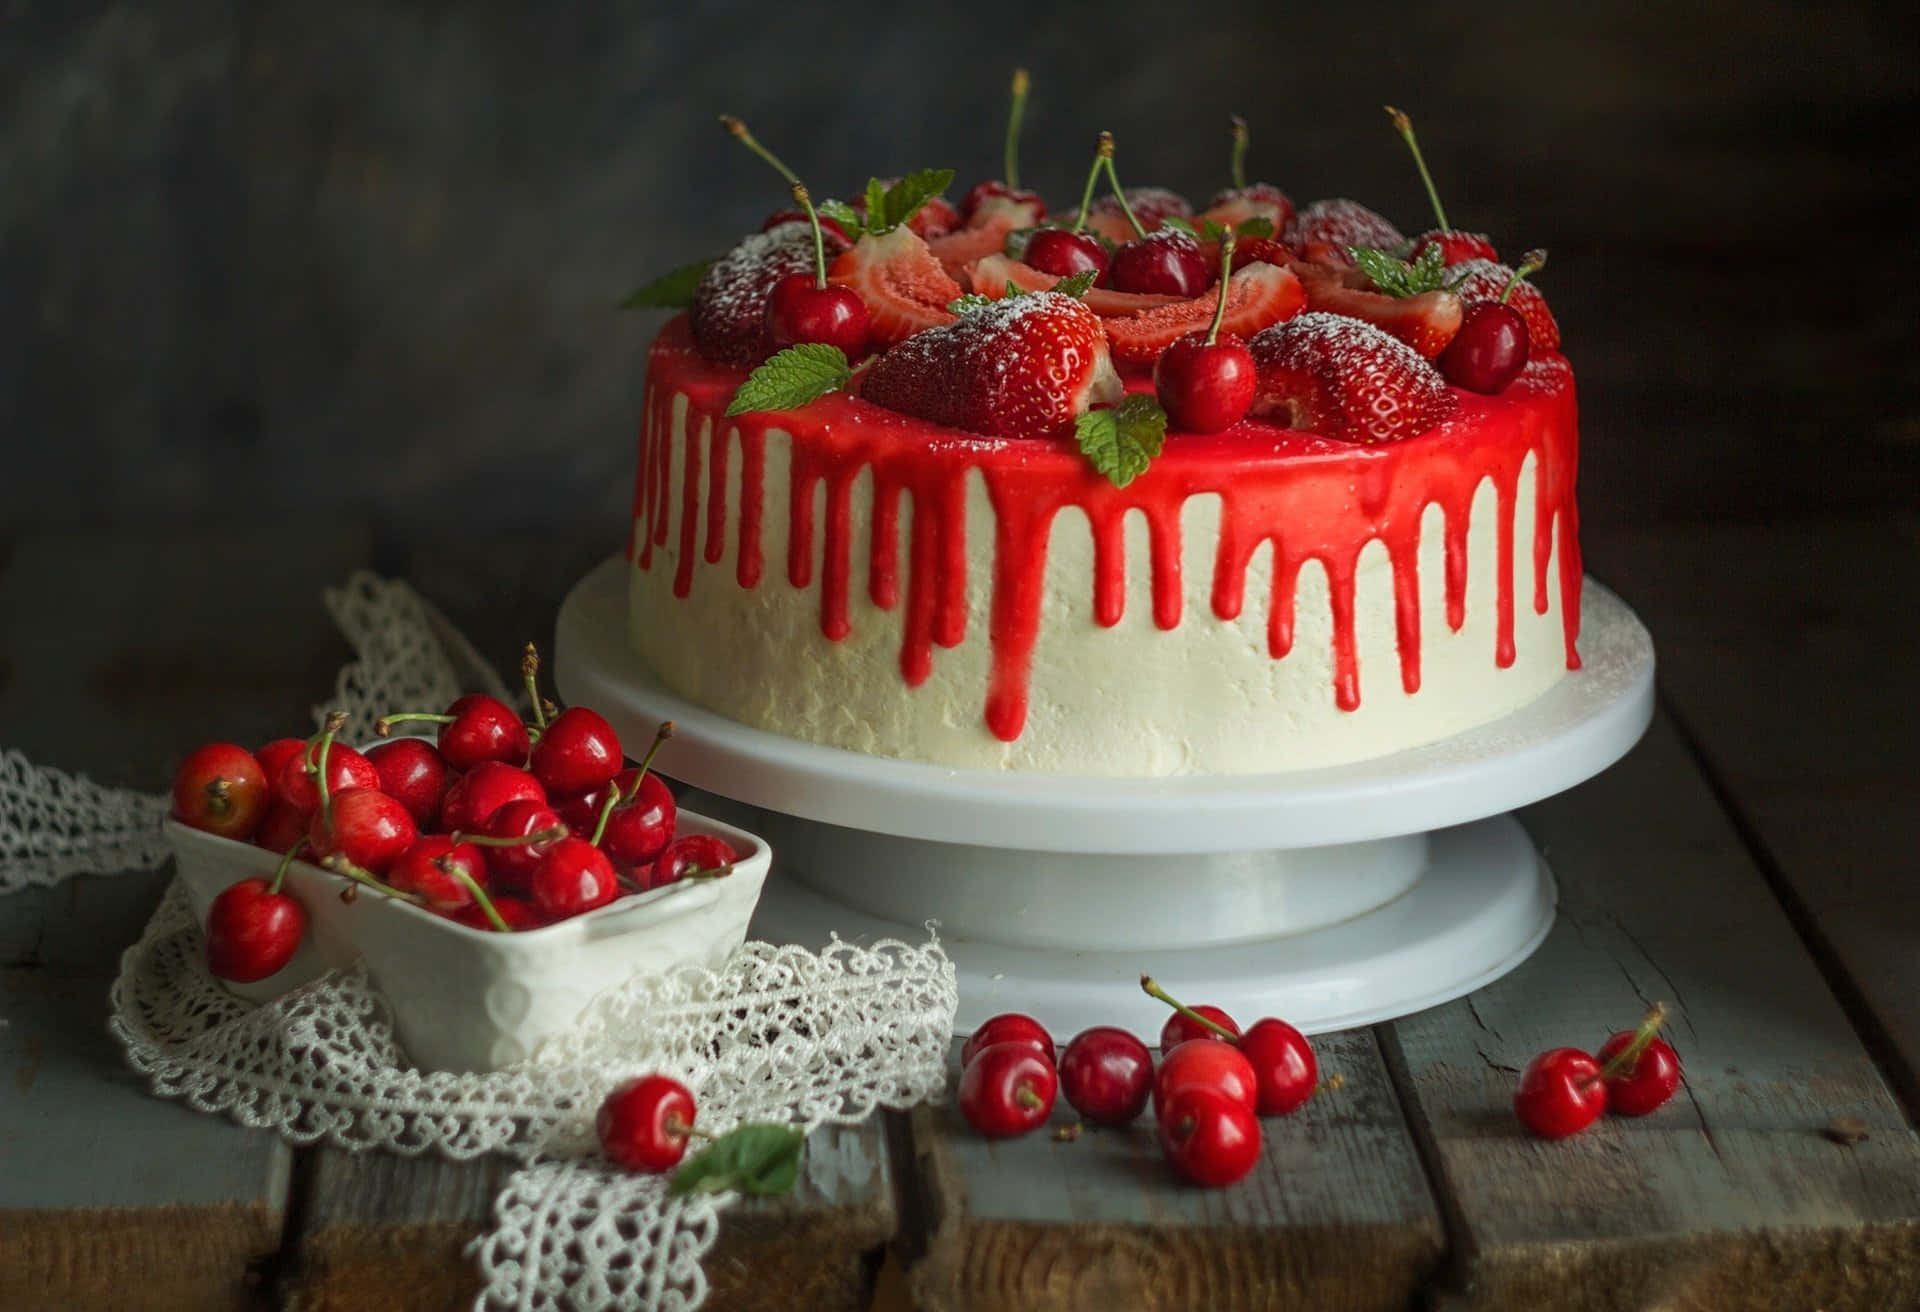 A Cake With Red Icing And Cherries On Top